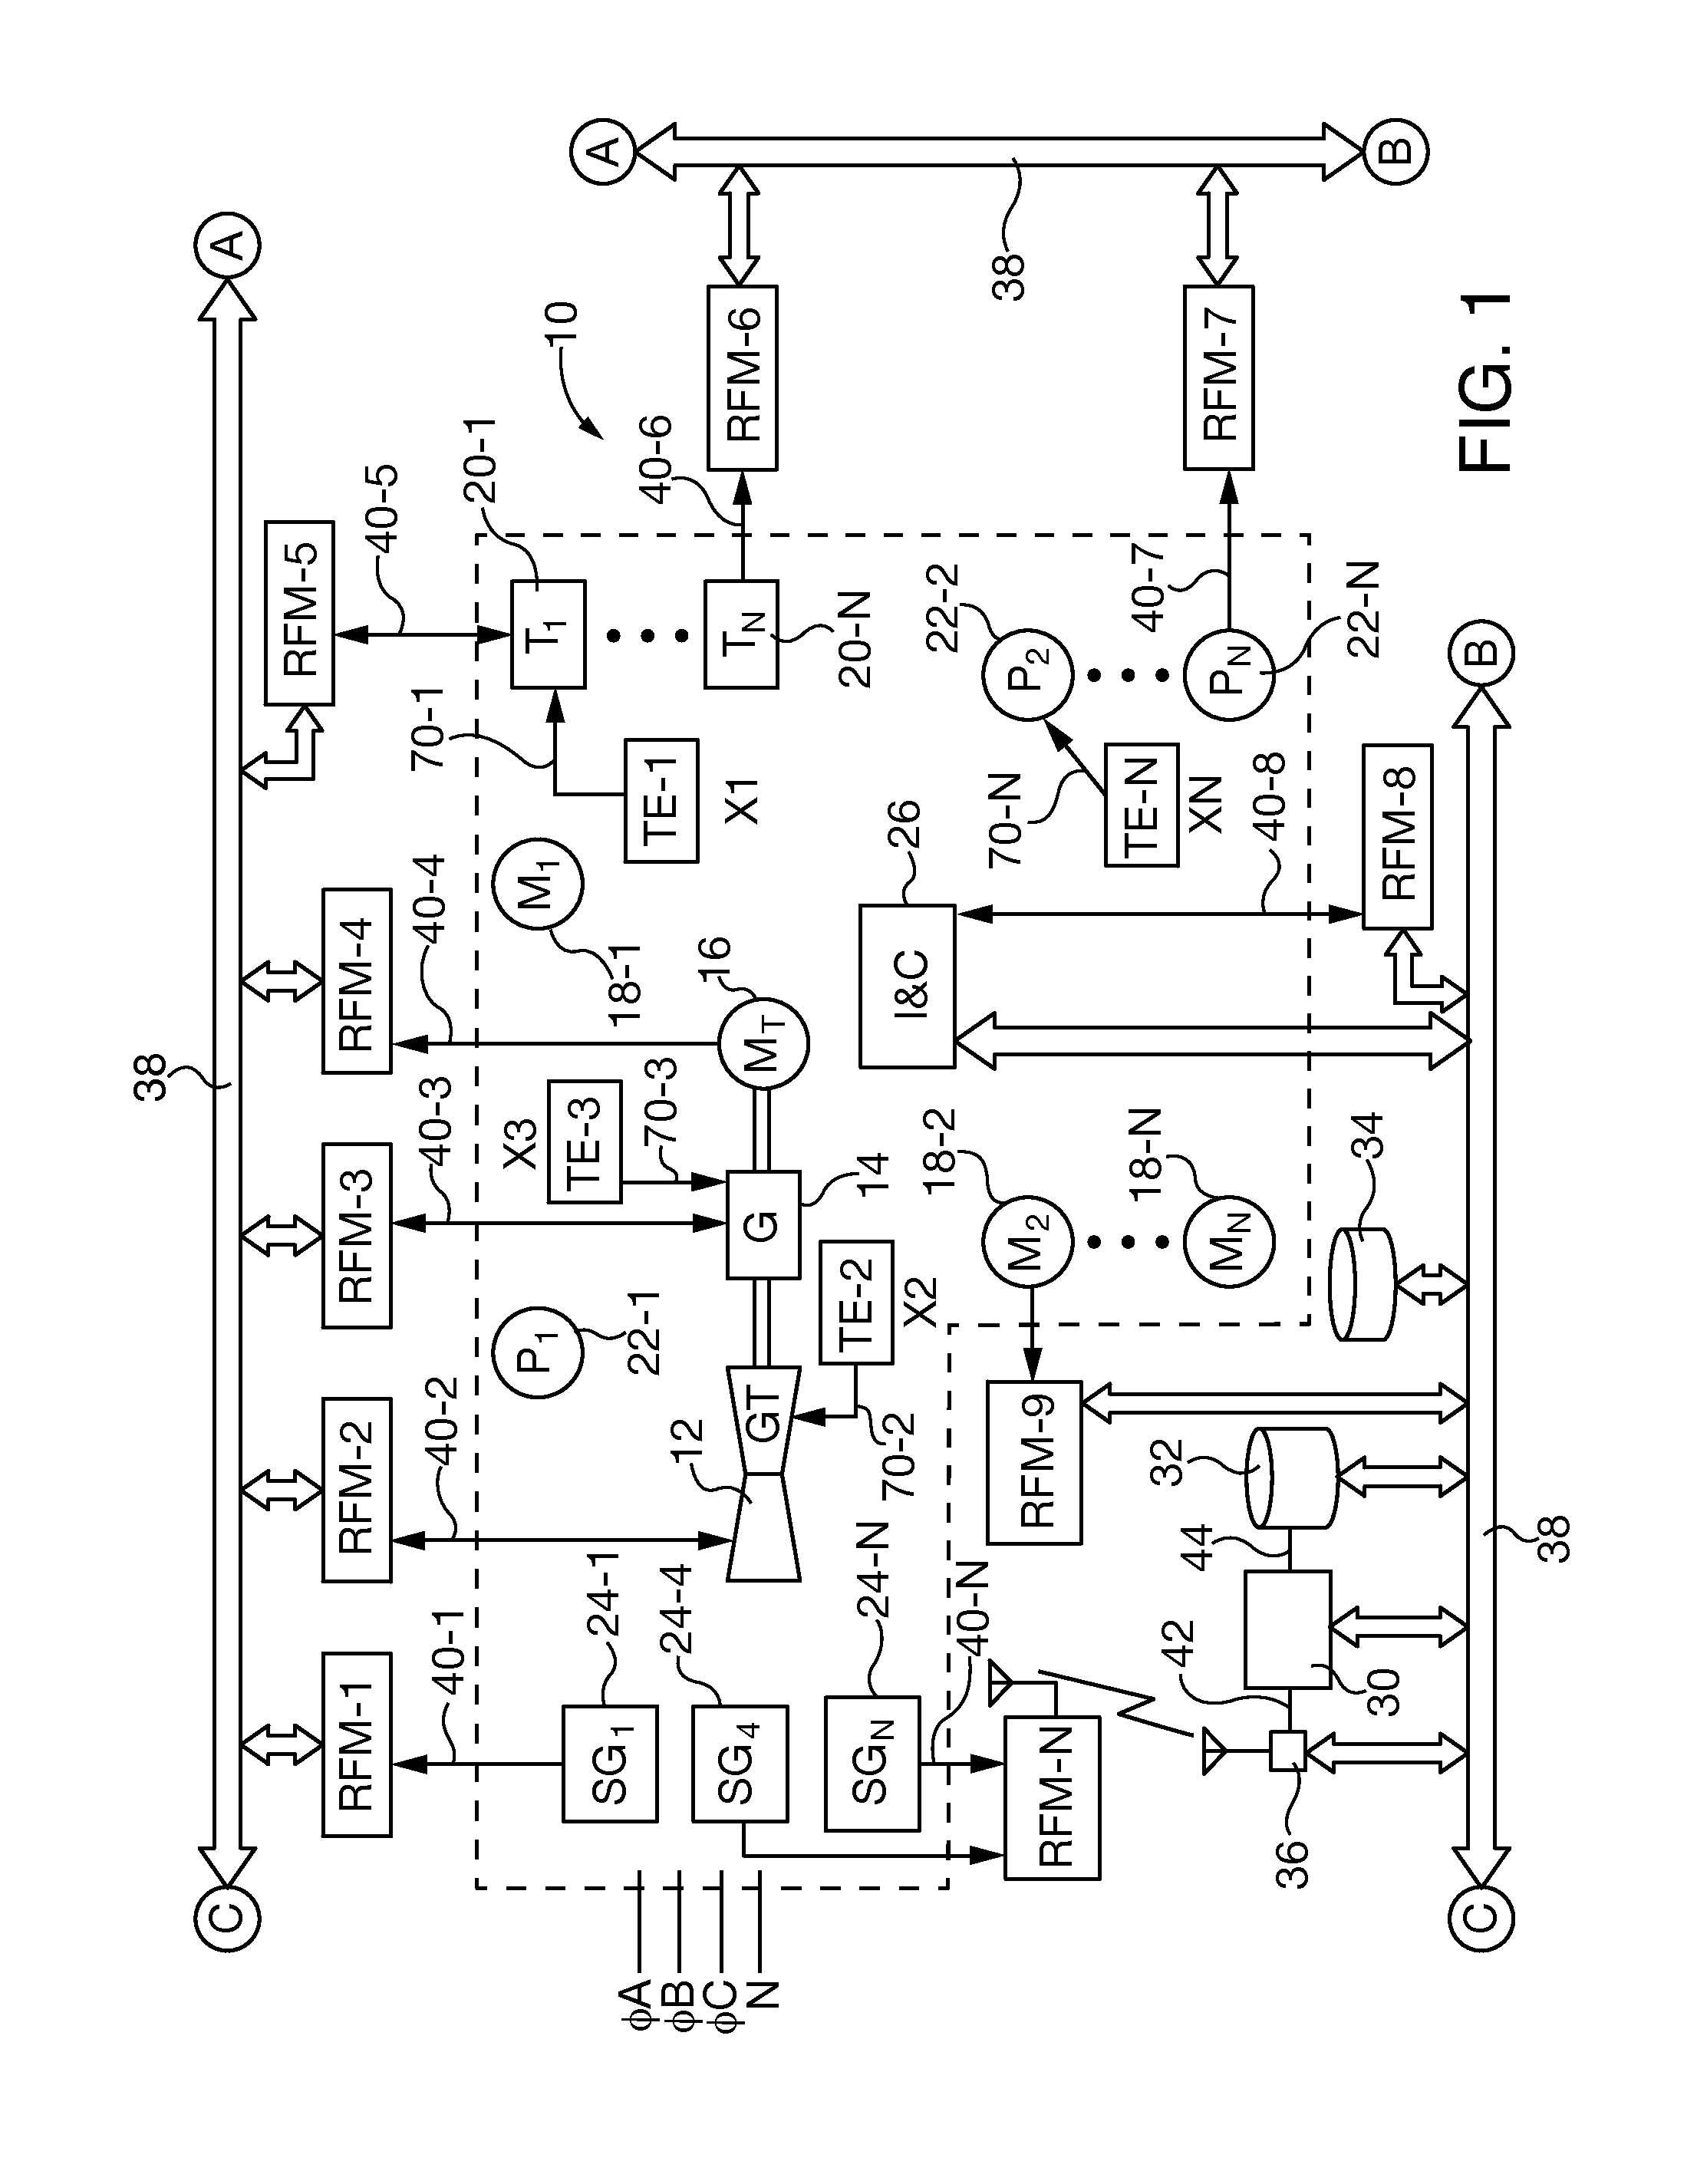 Self learning radio frequency monitoring system for identifying and locating faults in electrical distribution systems